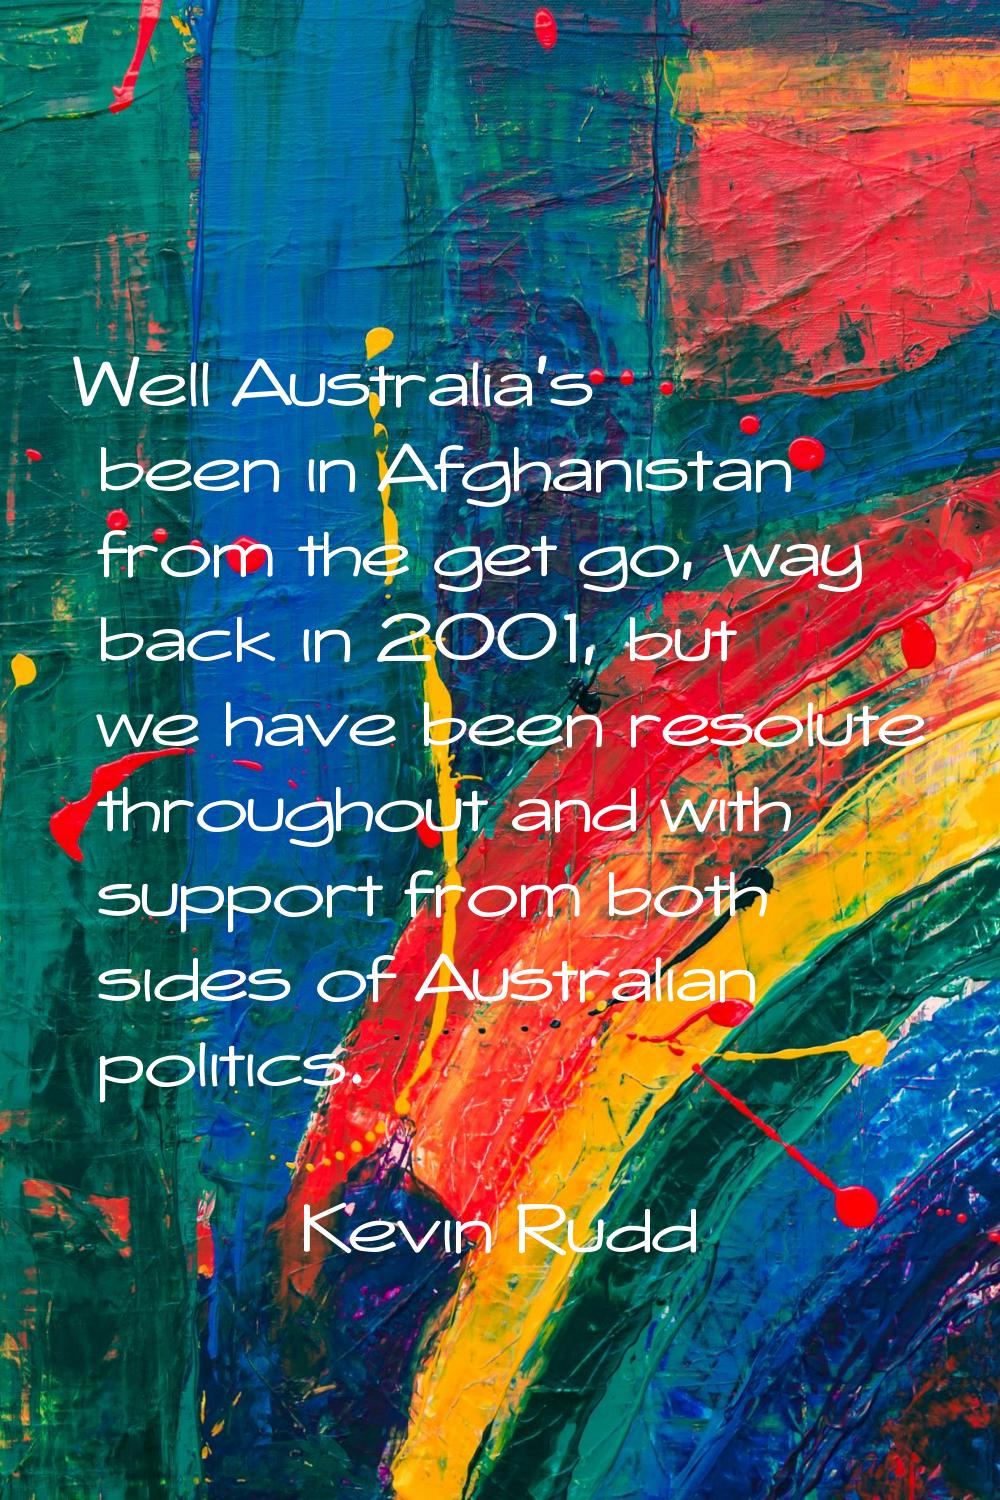 Well Australia's been in Afghanistan from the get go, way back in 2001, but we have been resolute t